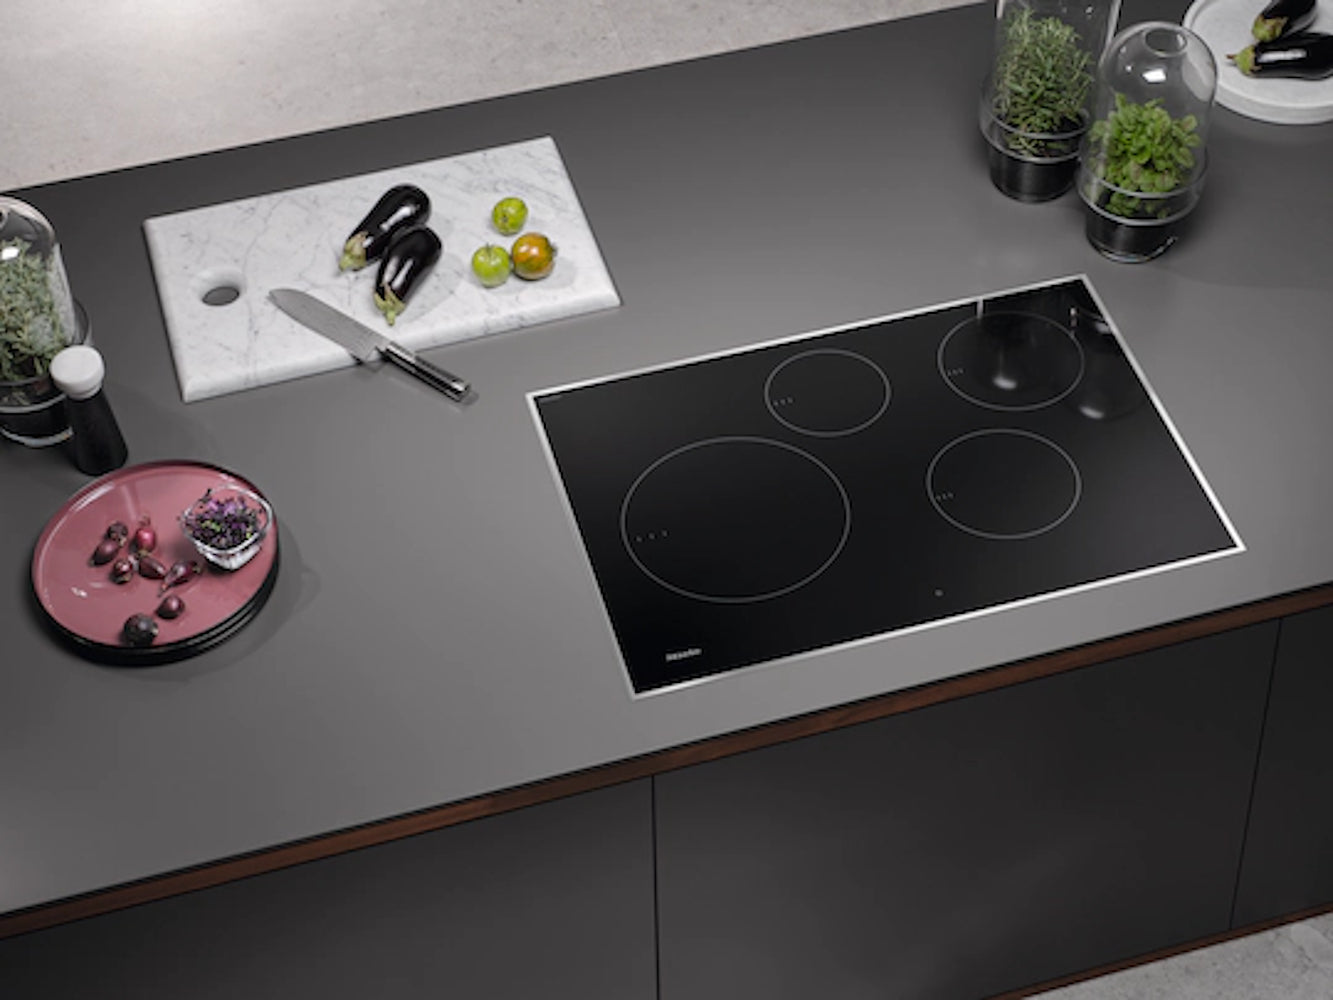 Miele - 30.6 Inch Induction Cooktop in Stainless - KM 7730 FR